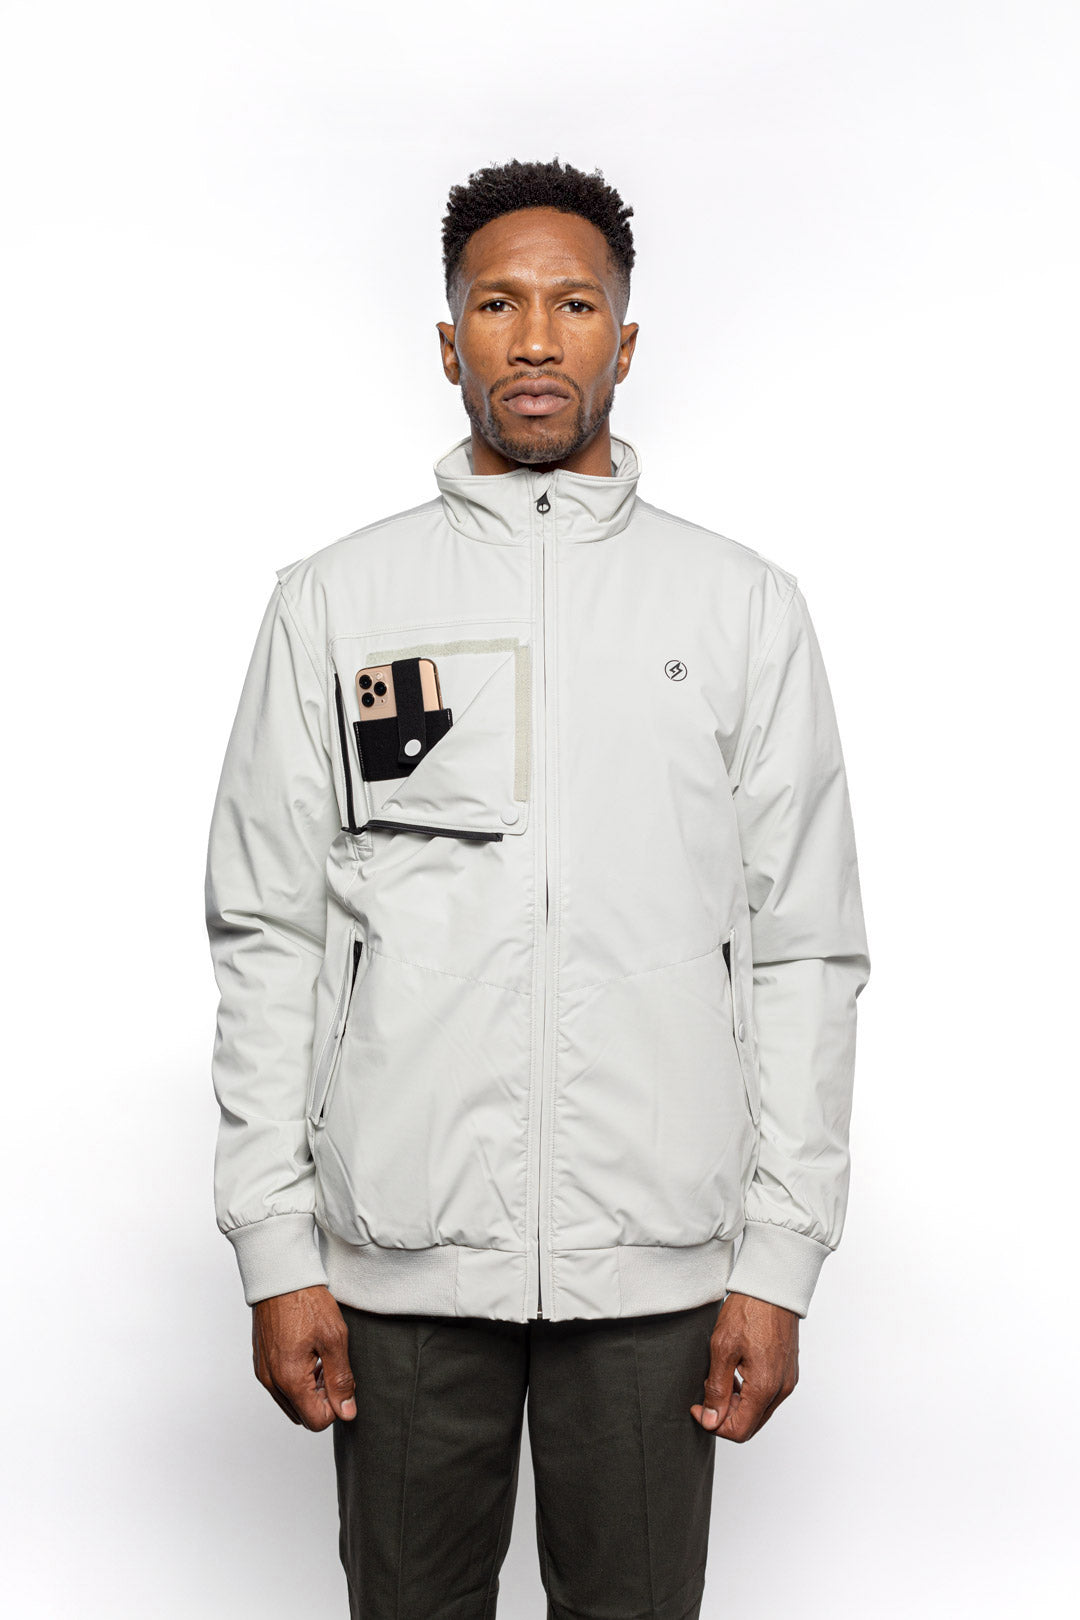 Front view of Male model wearing Royce Harrington Jacket in Chalk colorway showing pocket for iPhone.